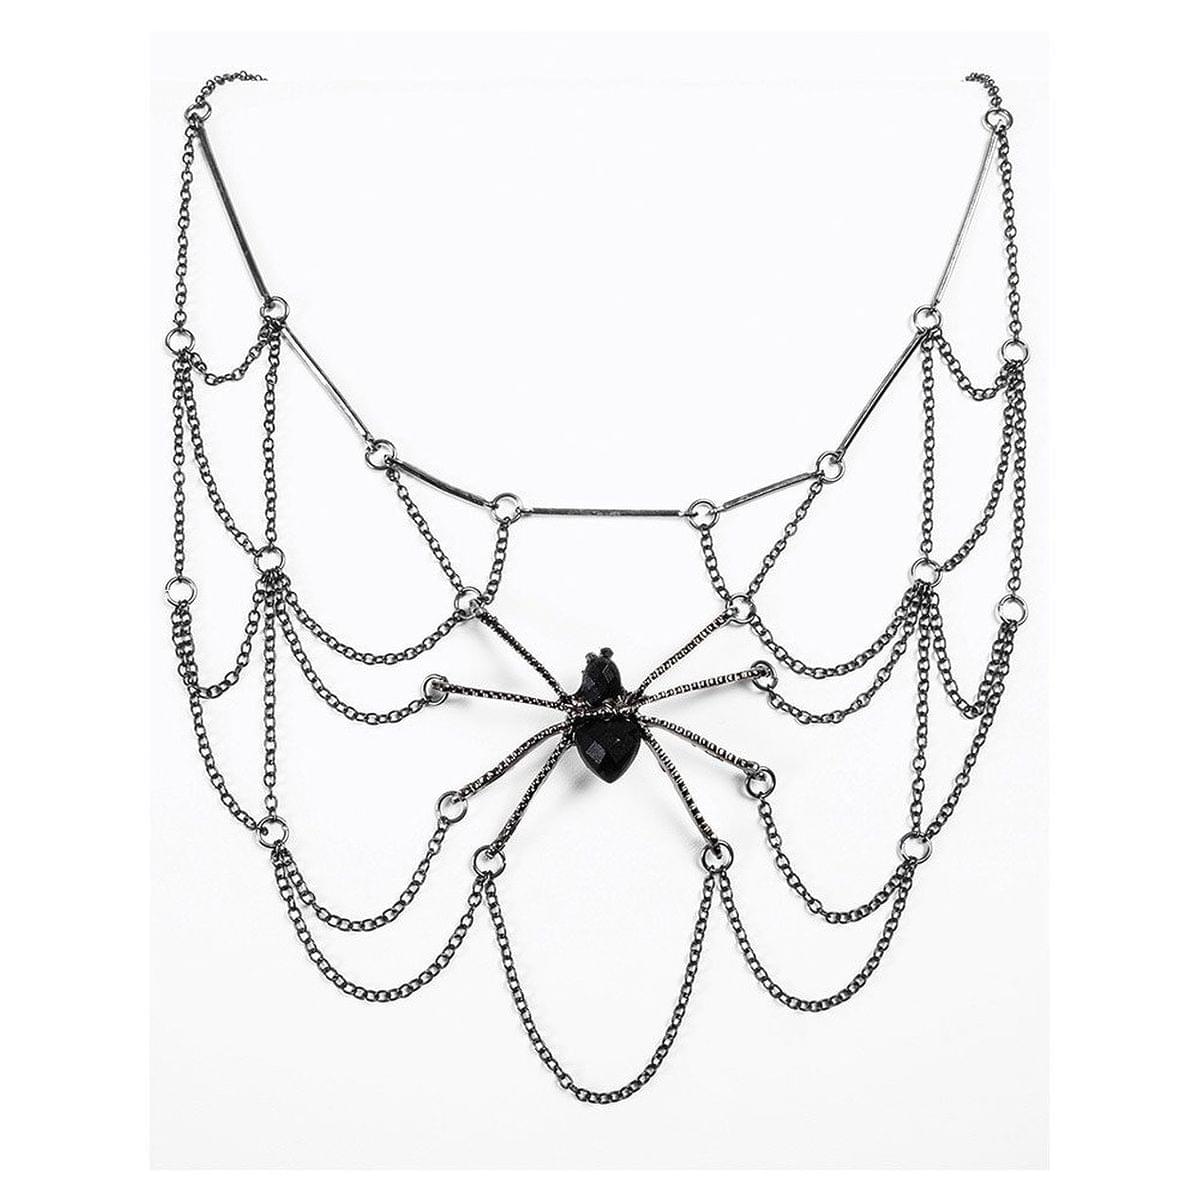 Witches And Wizards Spider Web Costume Necklace Adult